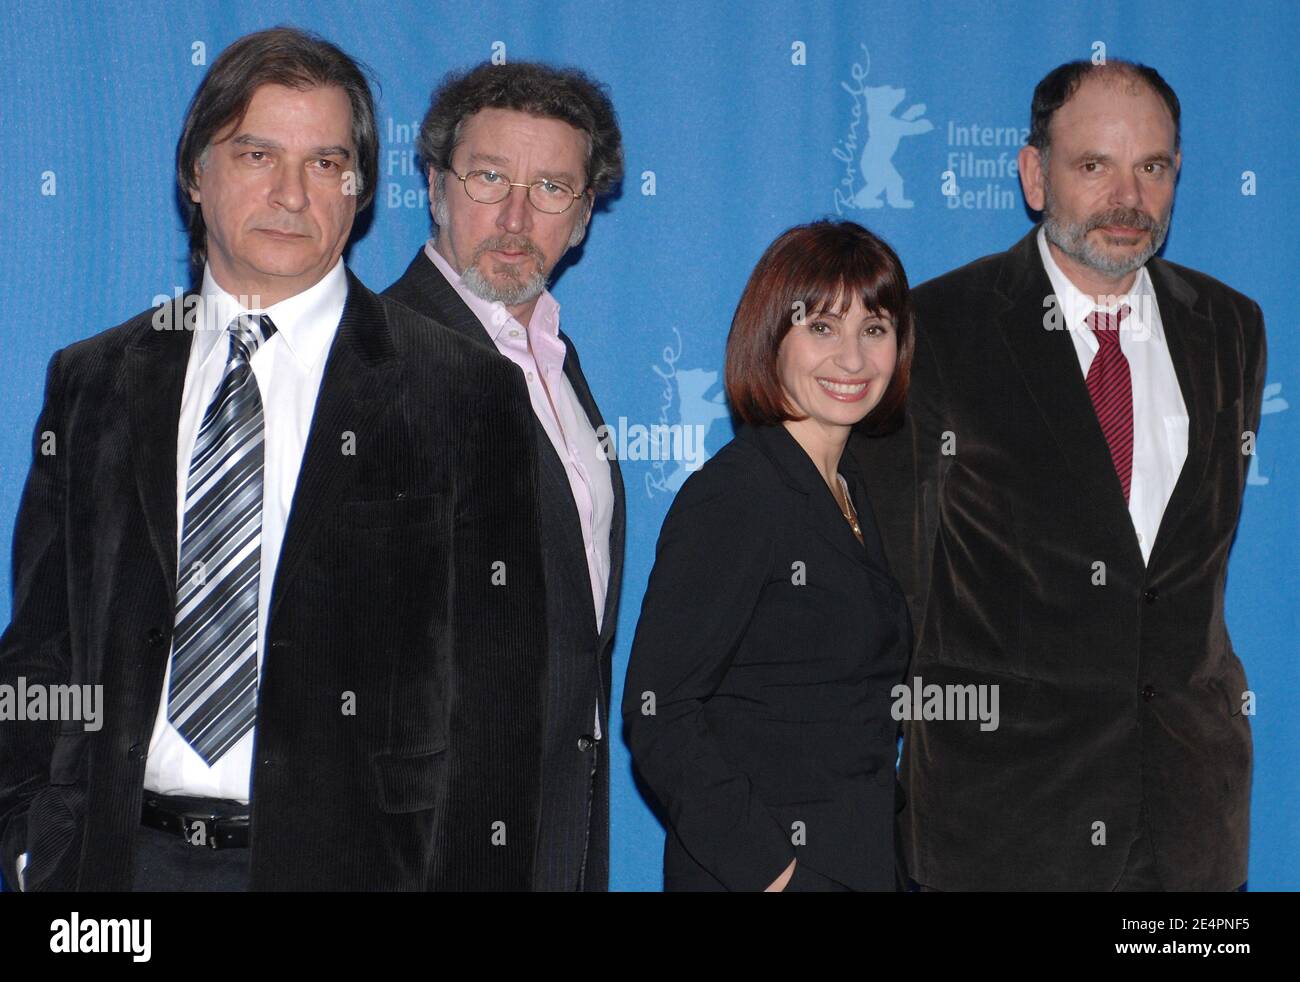 Director Robert Guediguian and cast members Ariane Ascaride, Gerard Meylan and Jean-Pierre Darroussin pose for pictures during the 'Lady Jane' photocall at the 58th annual Berlin Film Festival in Berlin, Germany, on February 13, 2008. Photo by Nicolas Khayat/ABACAPRESS.COM Stock Photo